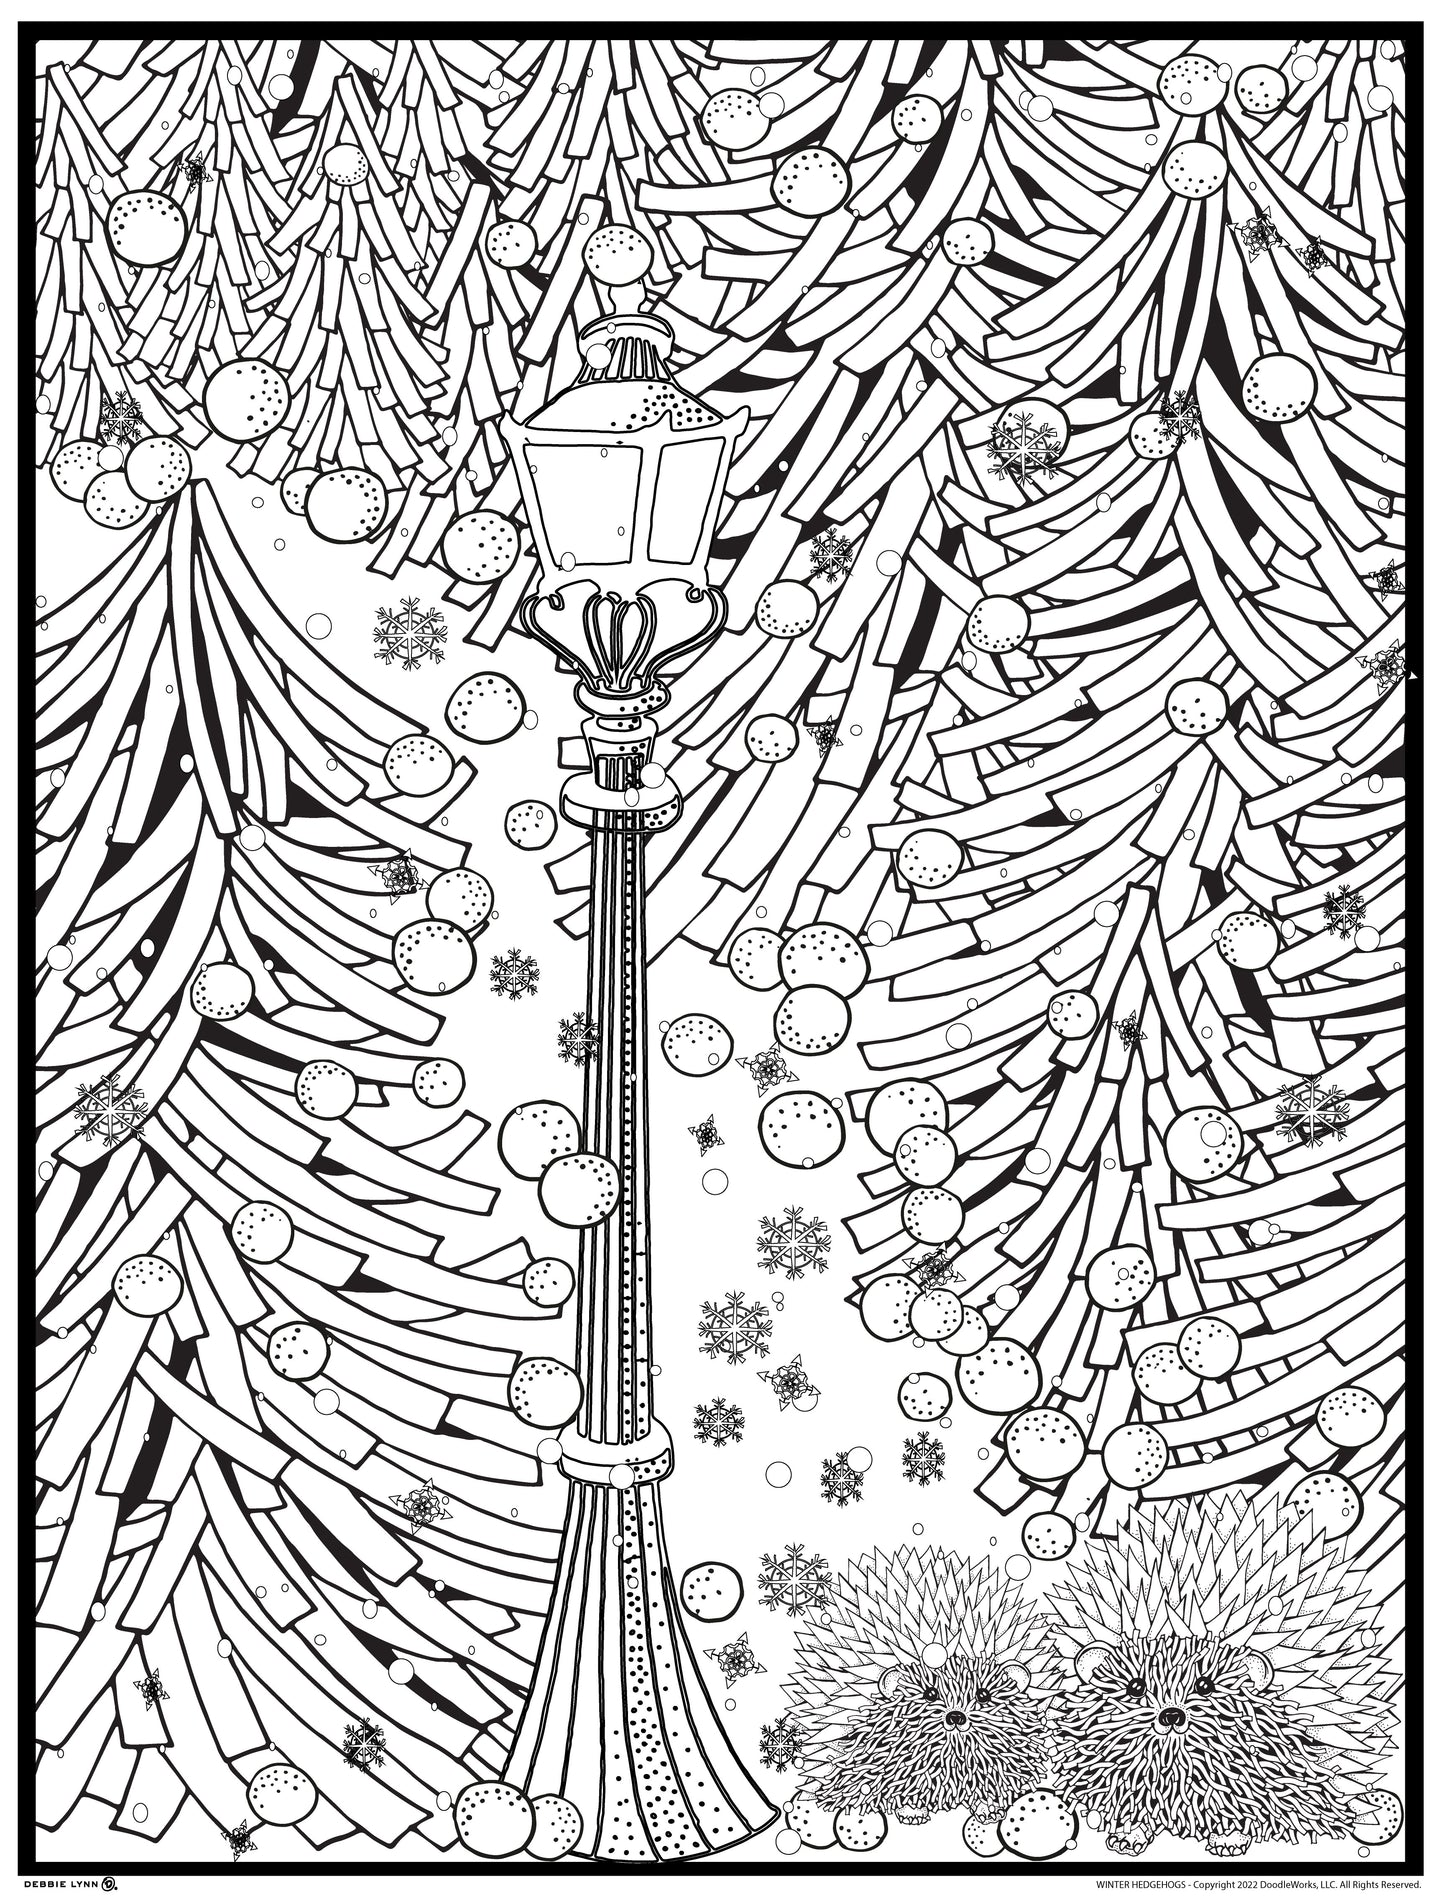 Winter Hedgehogs Personalized Giant Coloring Poster 46"x60"